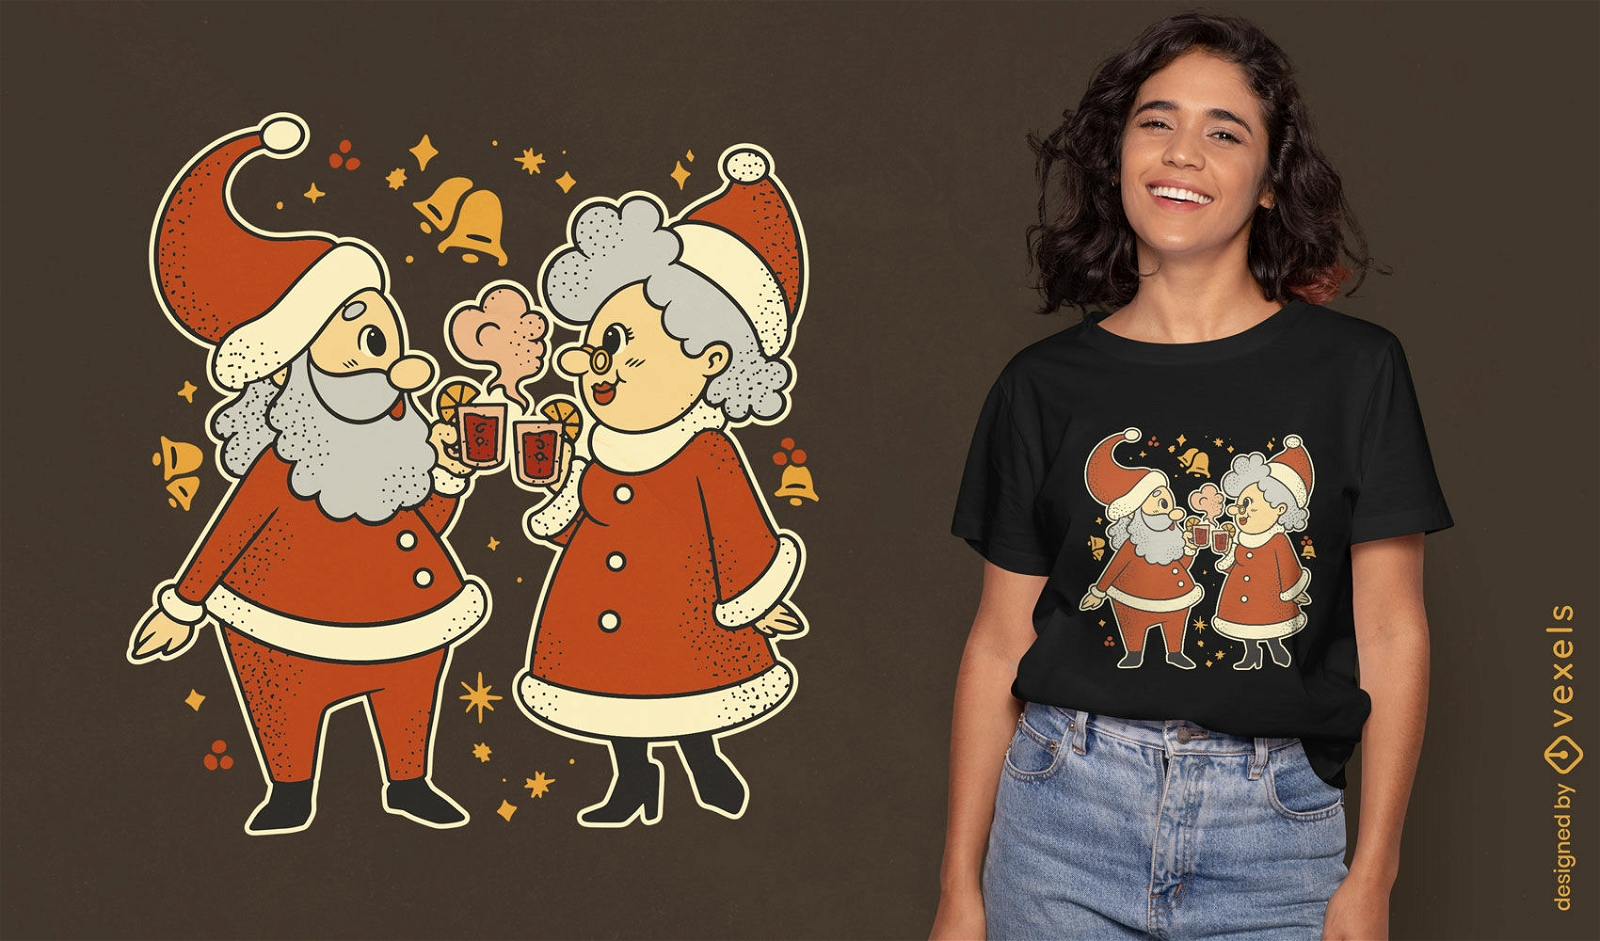 Mr and mrs Claus t-shirt design